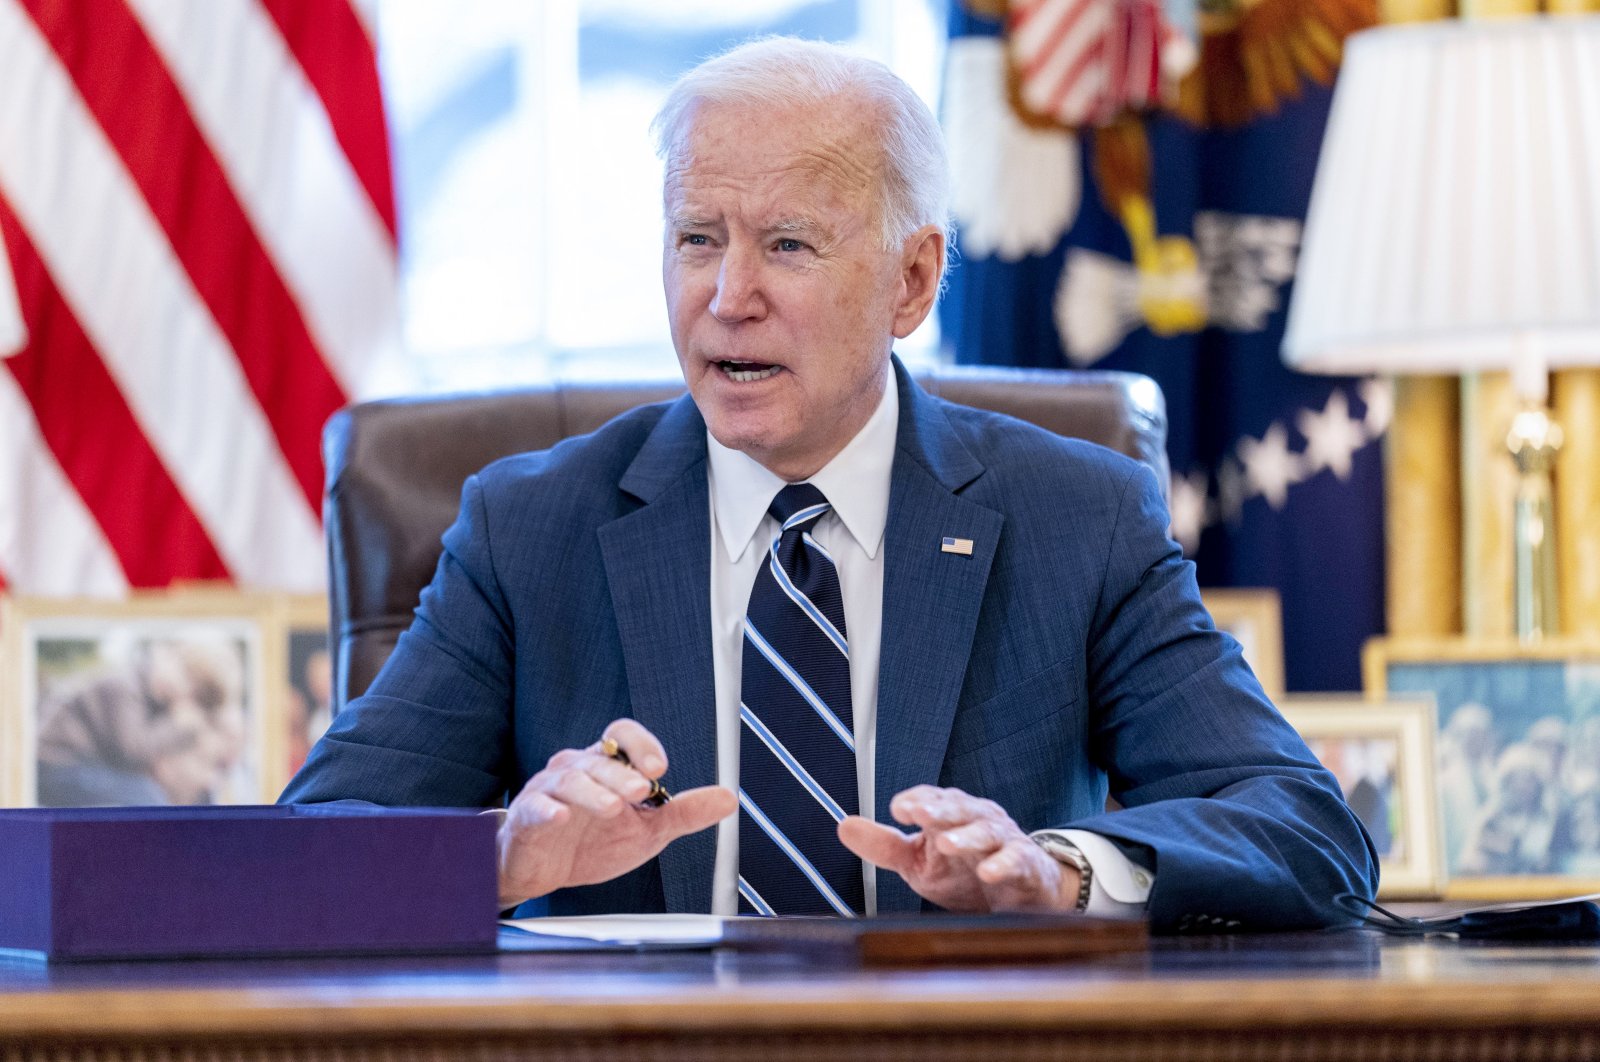 U.S. President Joe Biden speaks before signing the American Rescue Plan, a coronavirus relief package, in the Oval Office of the White House, Washington, March 11, 2021. (AP Photo)